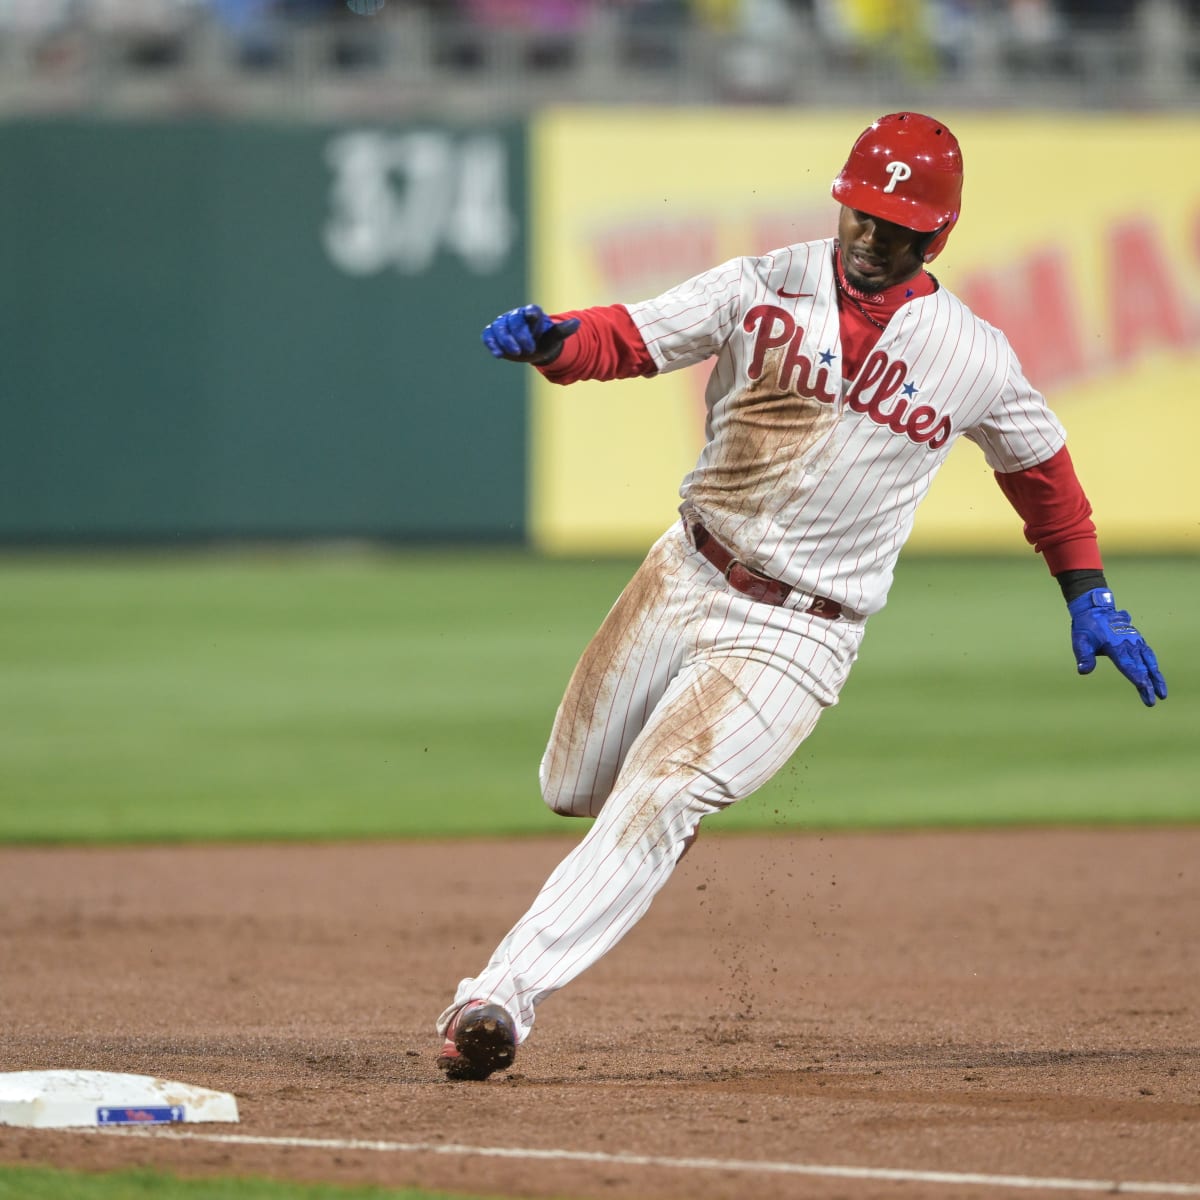 Gelb] The Phillies hold a $17 million option for Jean Segura in 2023.  They're likely to pay $1 million to buy it out. : r/baseball